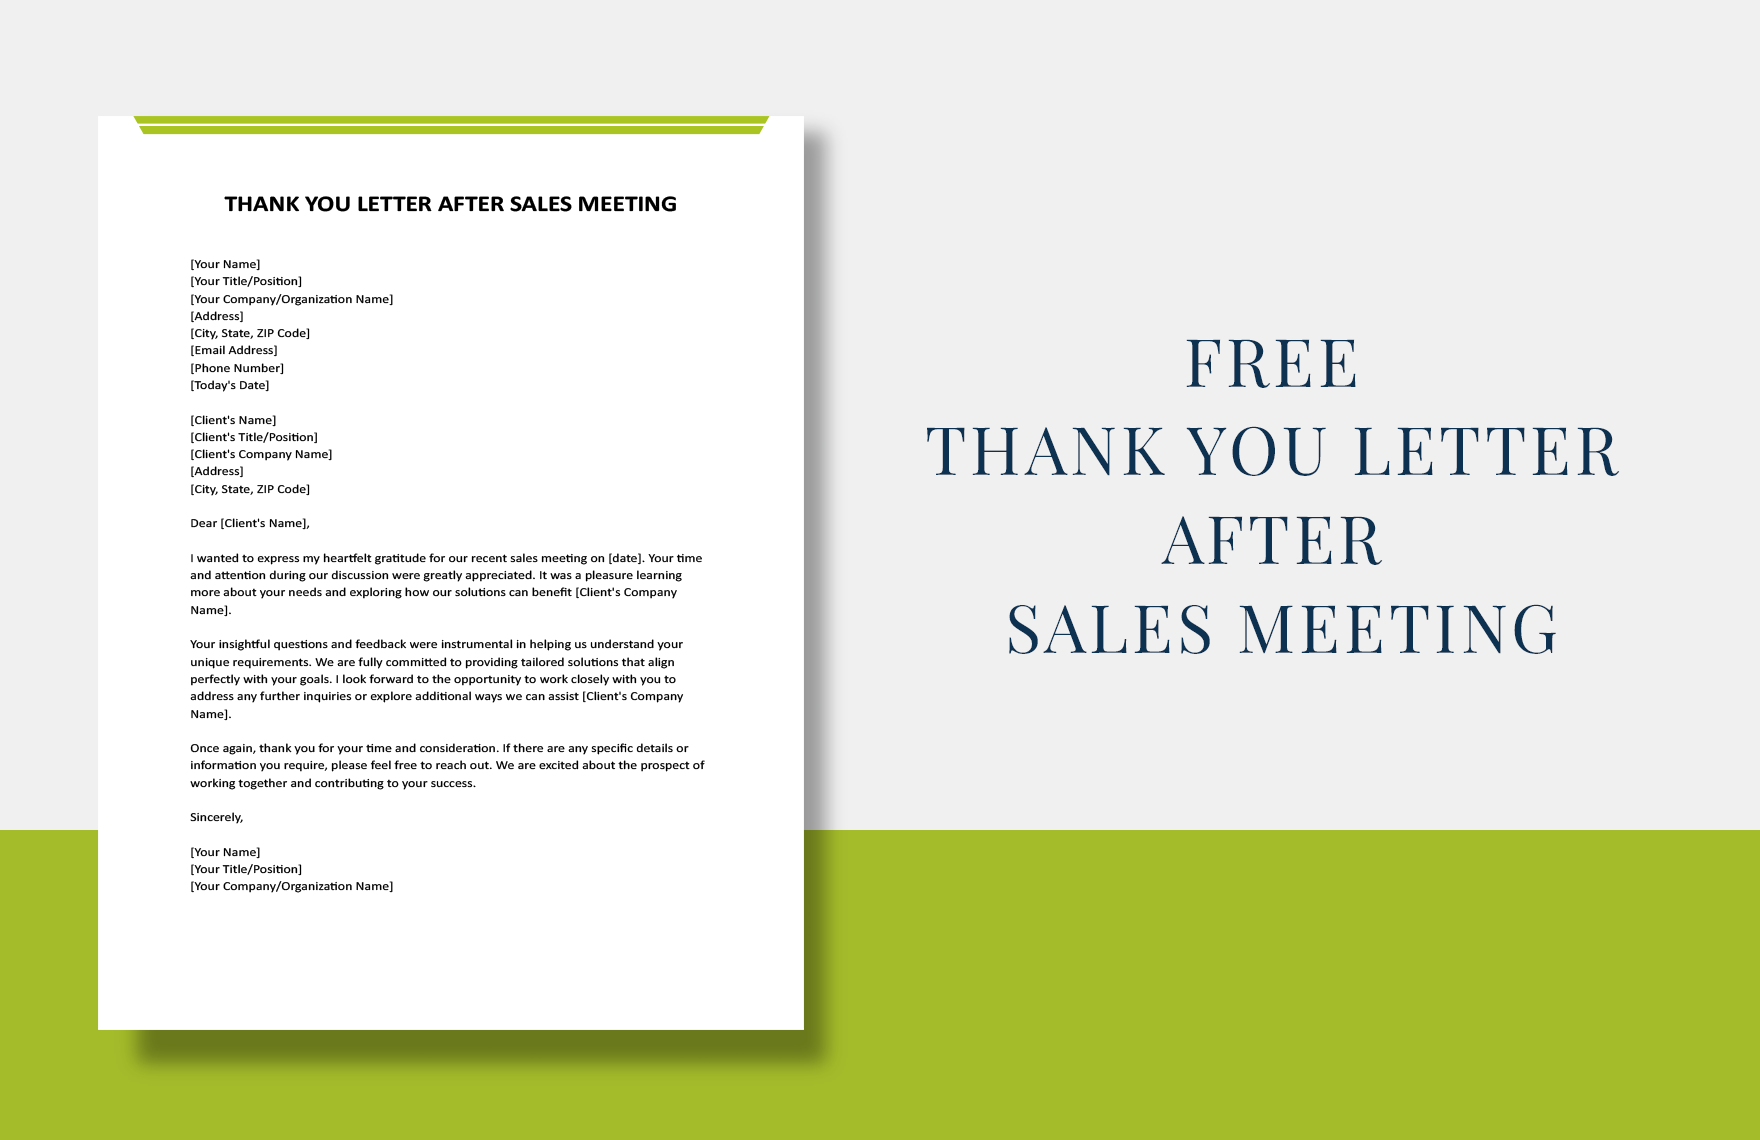 Free Thank You Letter After Sales Meeting